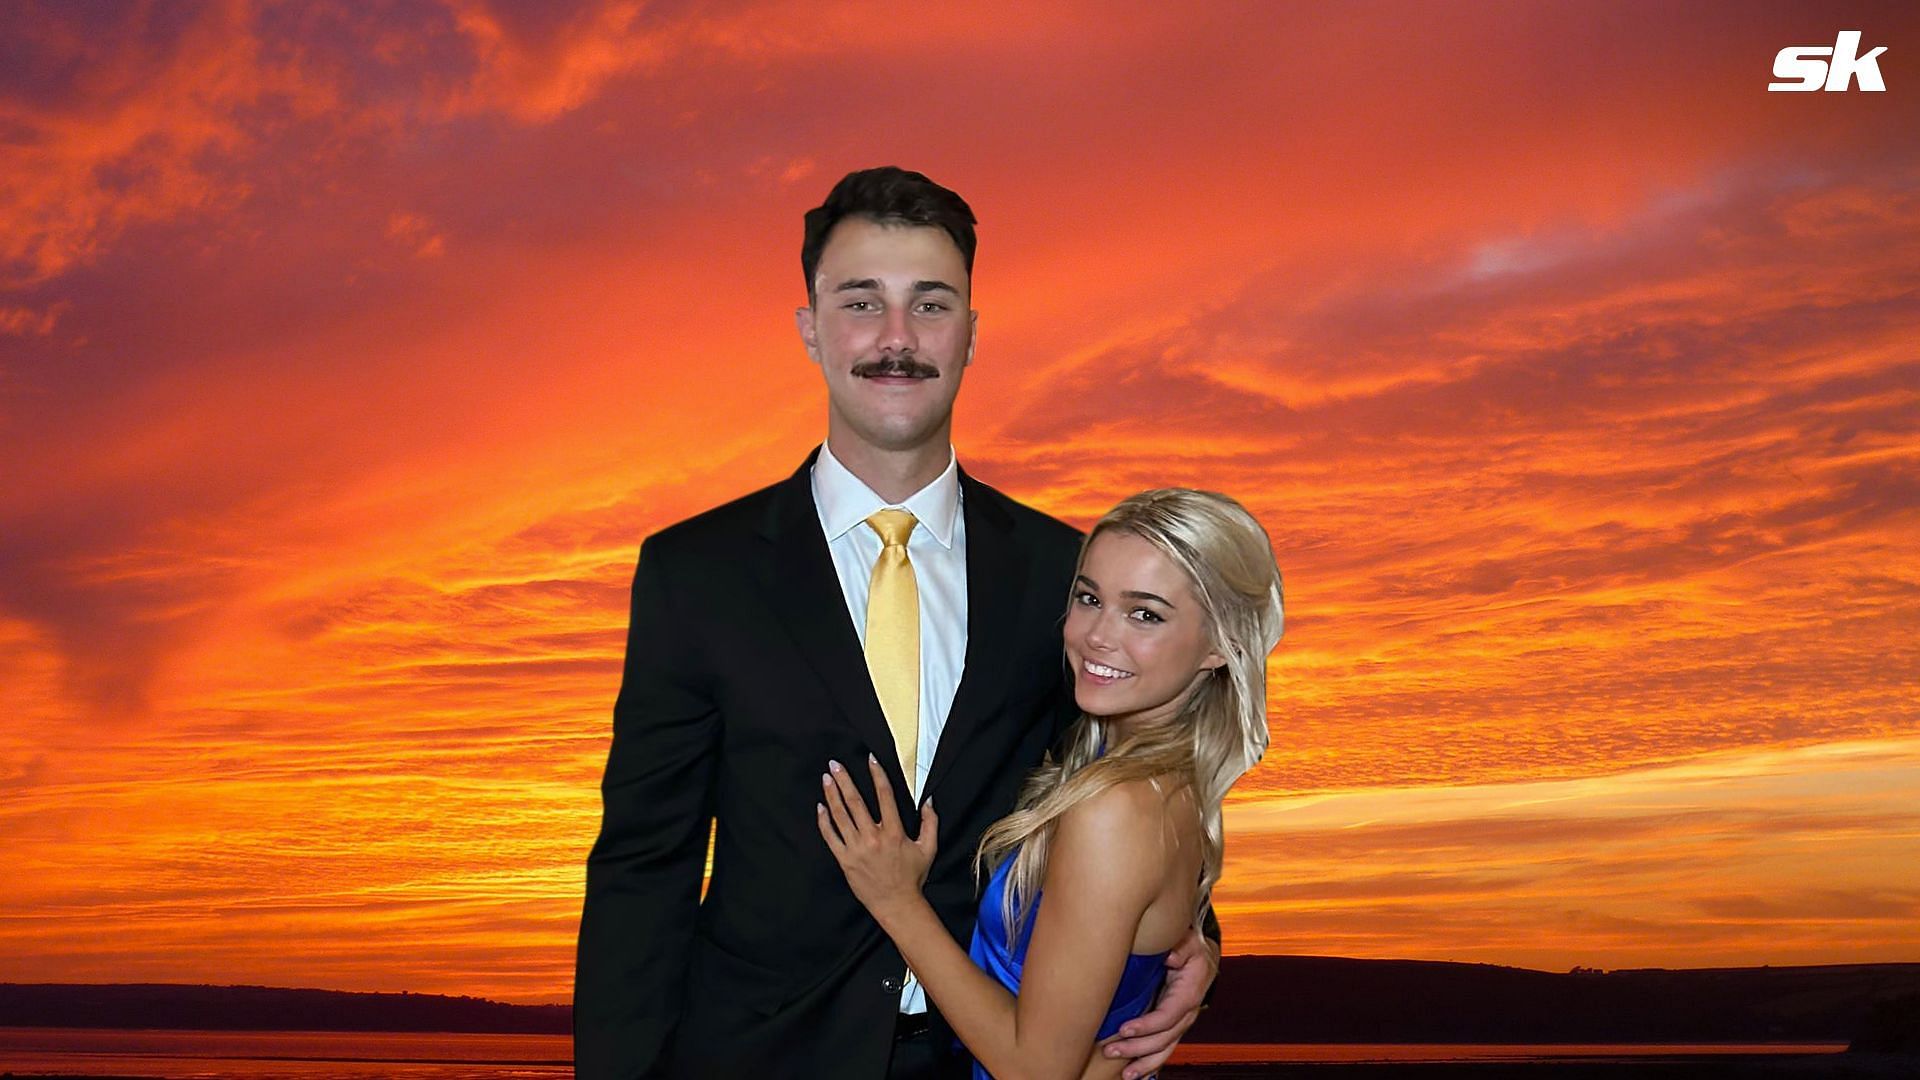 LSU gymnast Olivia Dunne and her boyfriend Paul Skenes are a picture-perfect couple